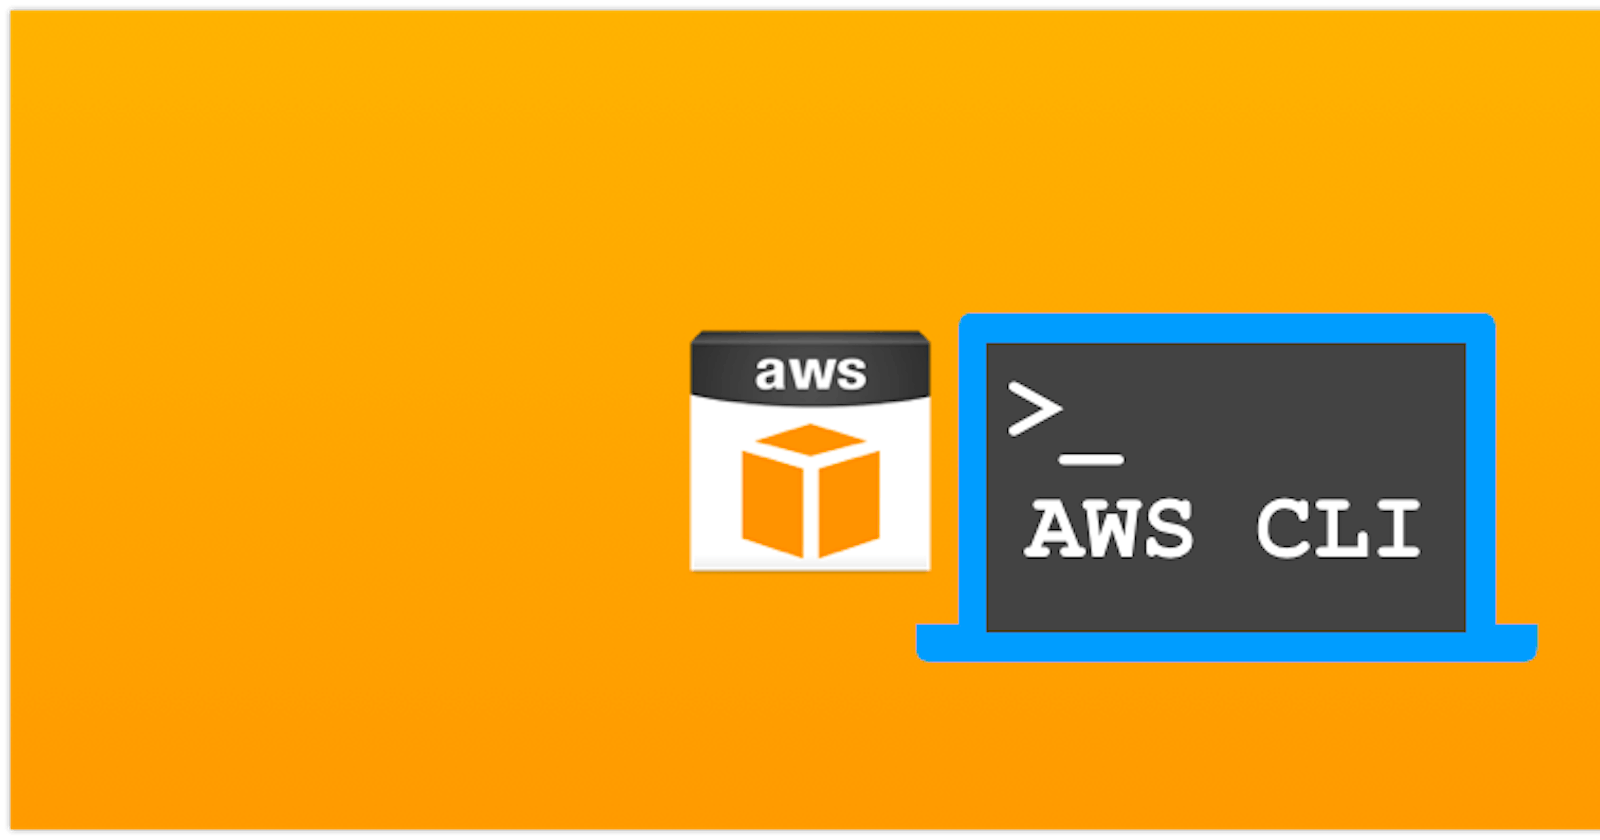 EC2 Management: Launching Instances with AWS CLI